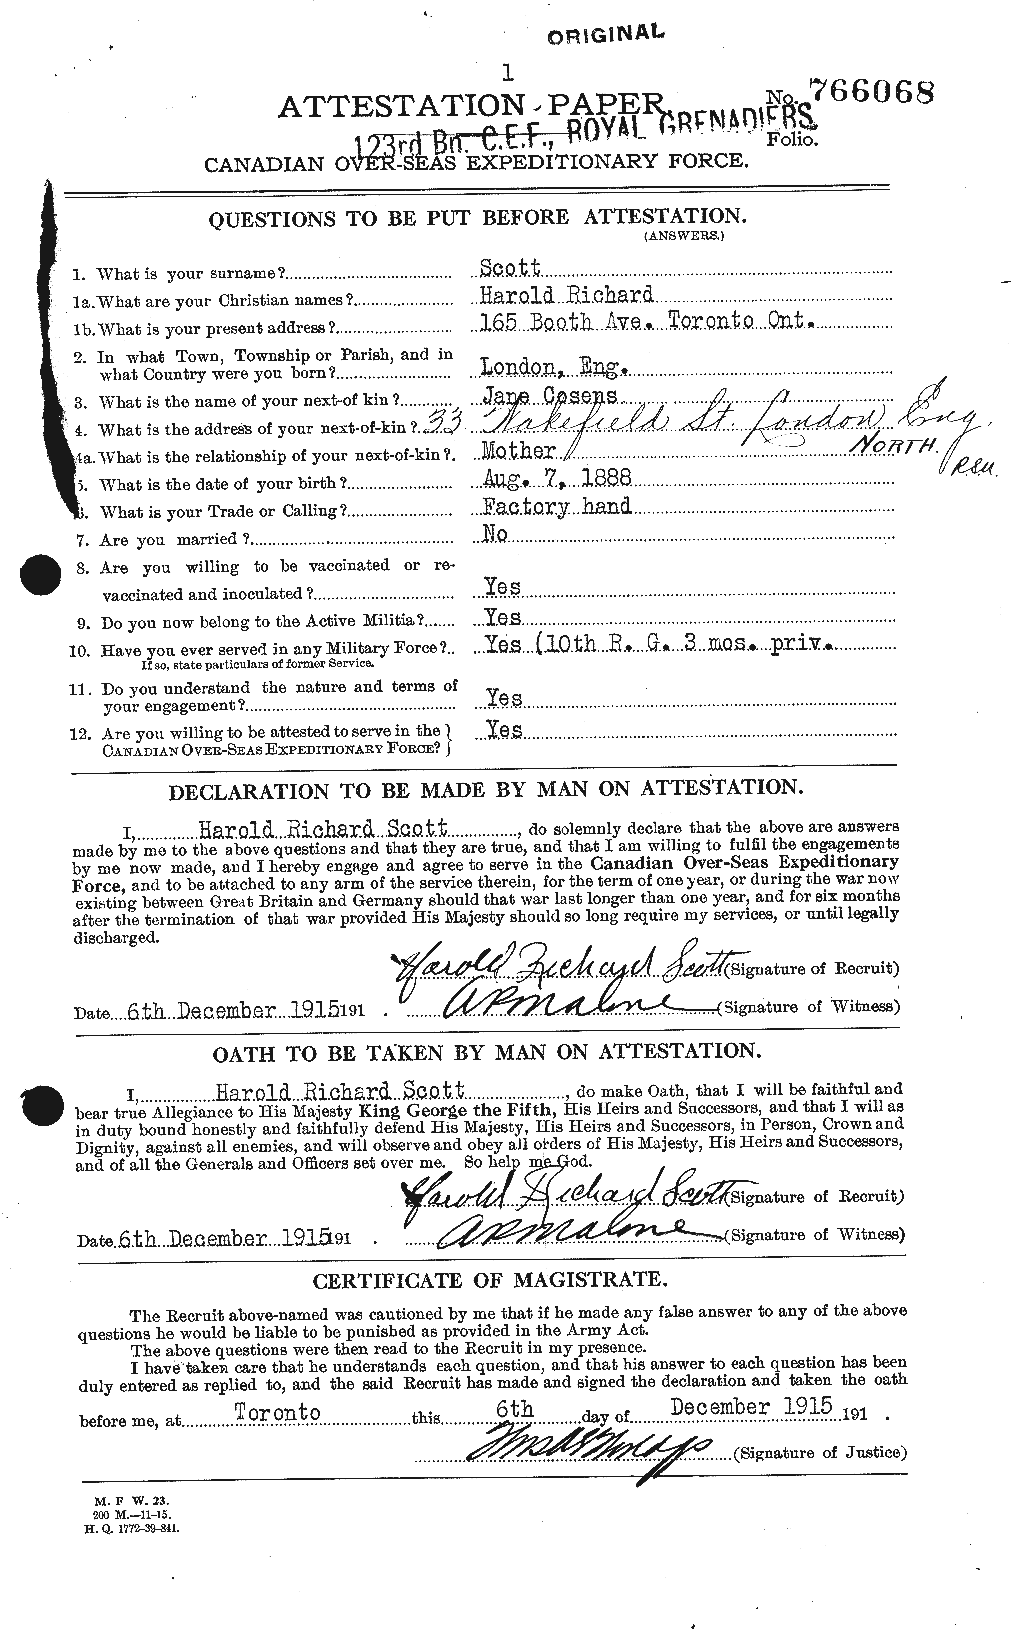 Personnel Records of the First World War - CEF 086332a